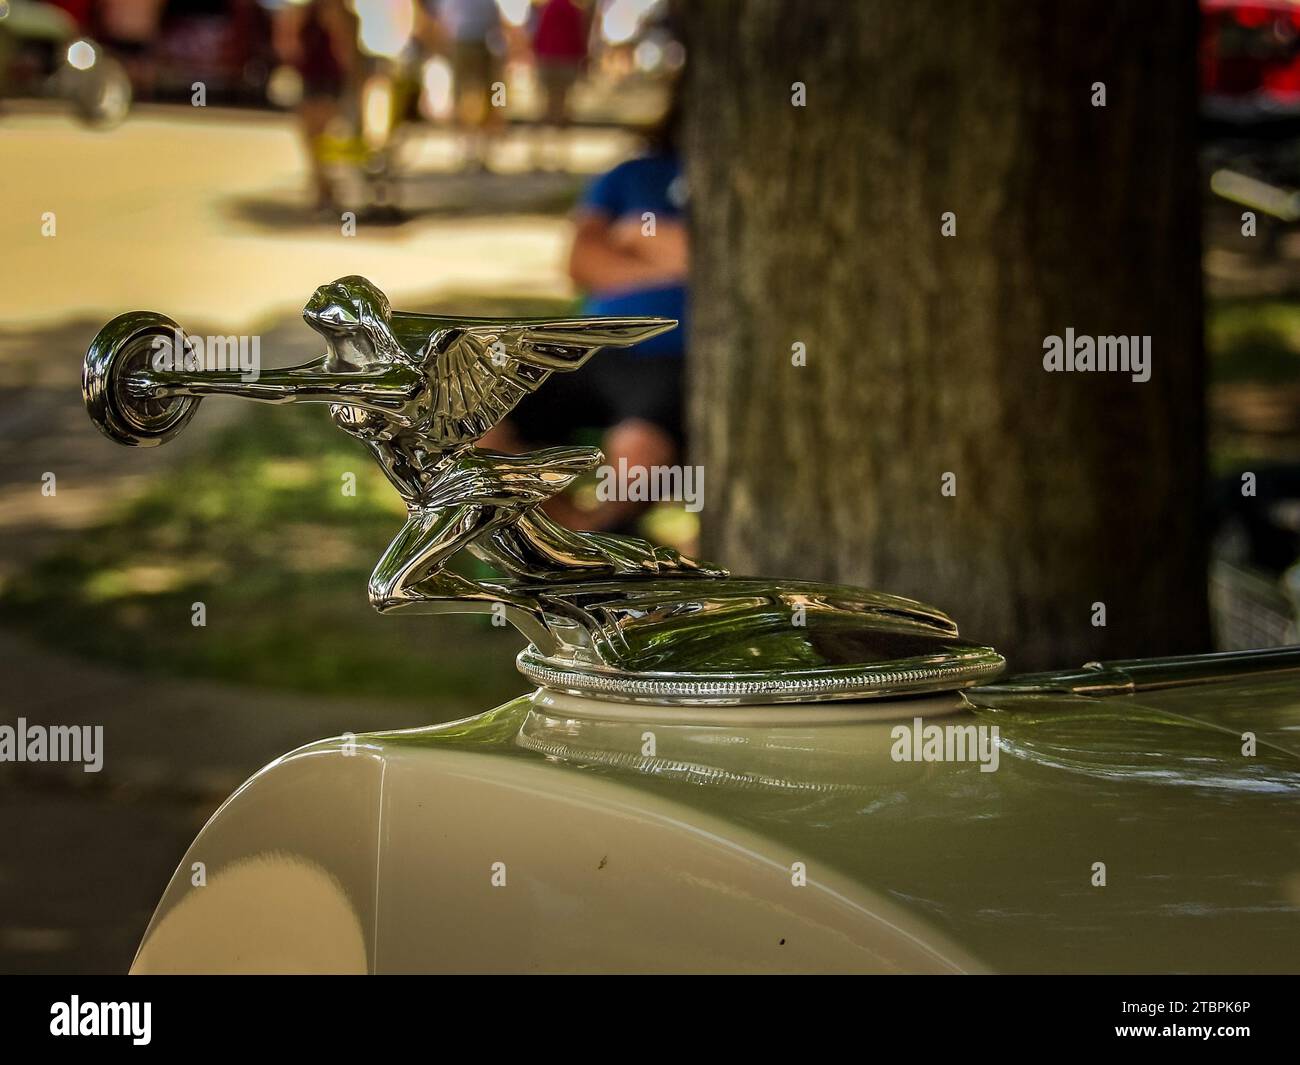 A vintage automobile hood ornament is displayed on the pavement next to a street curb Stock Photo